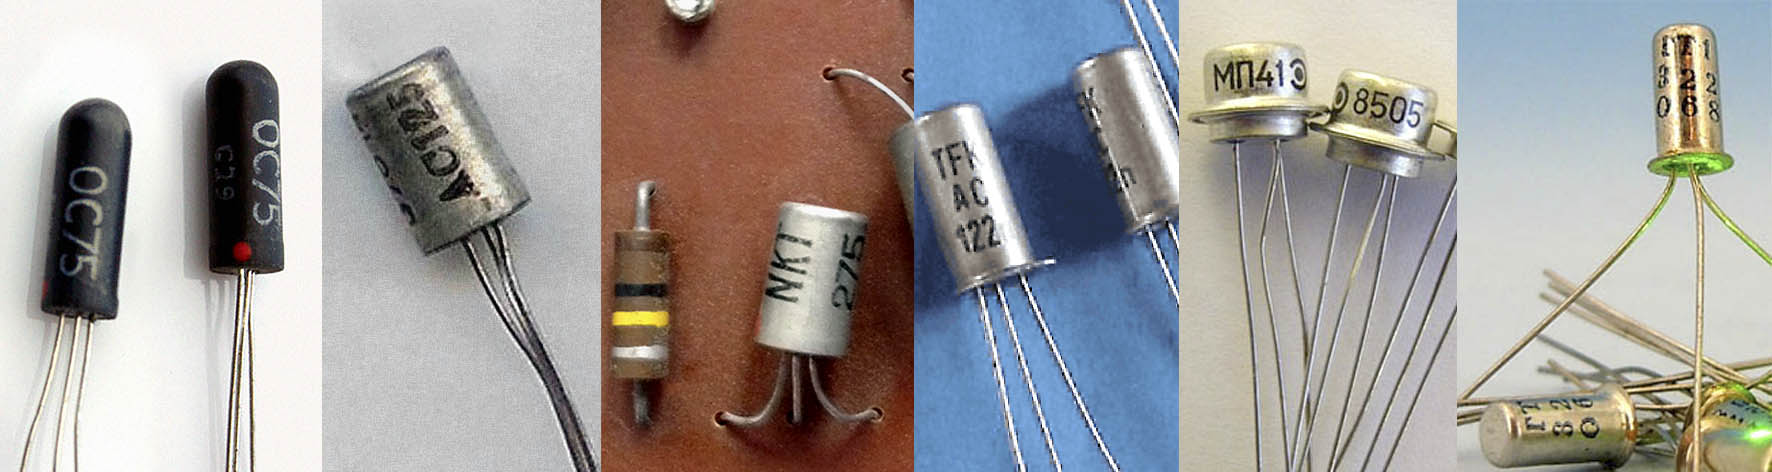 Germanium transistors for fuzz, boosters, audio preamps : NKT275, OC75)